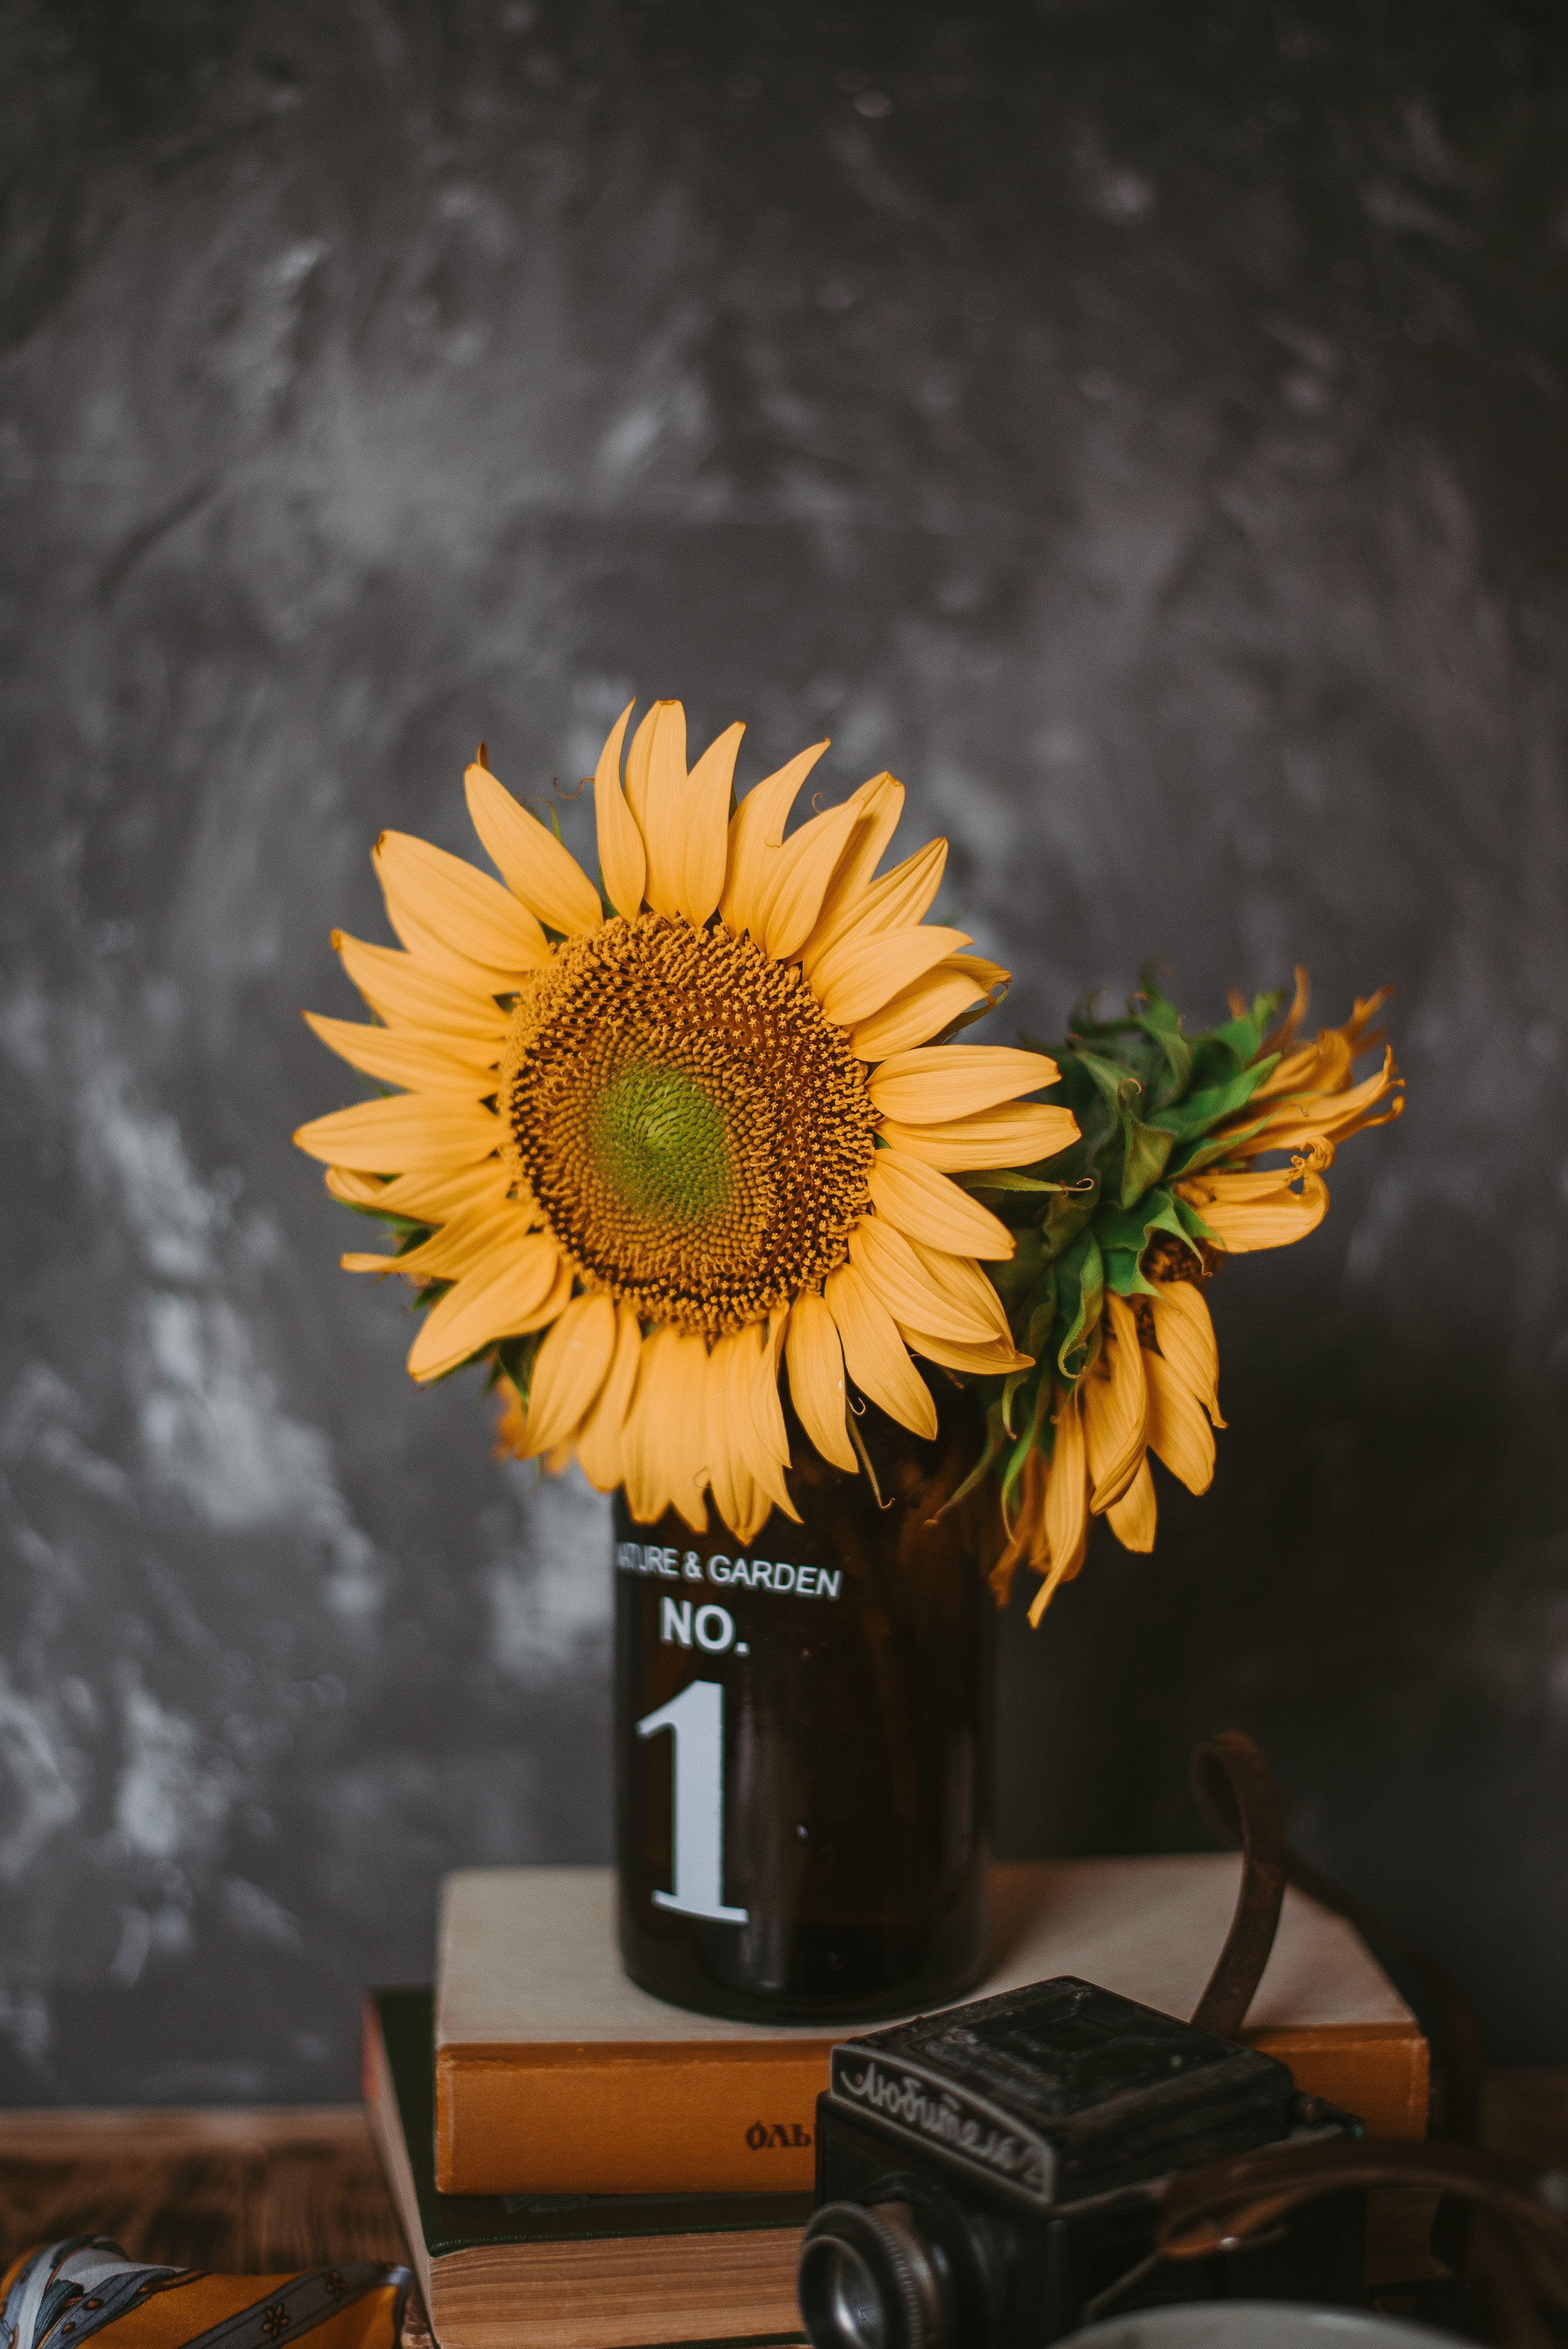 miscellanea, books, sunflowers, flowers, miscellaneous, vase, camera cell phone wallpapers